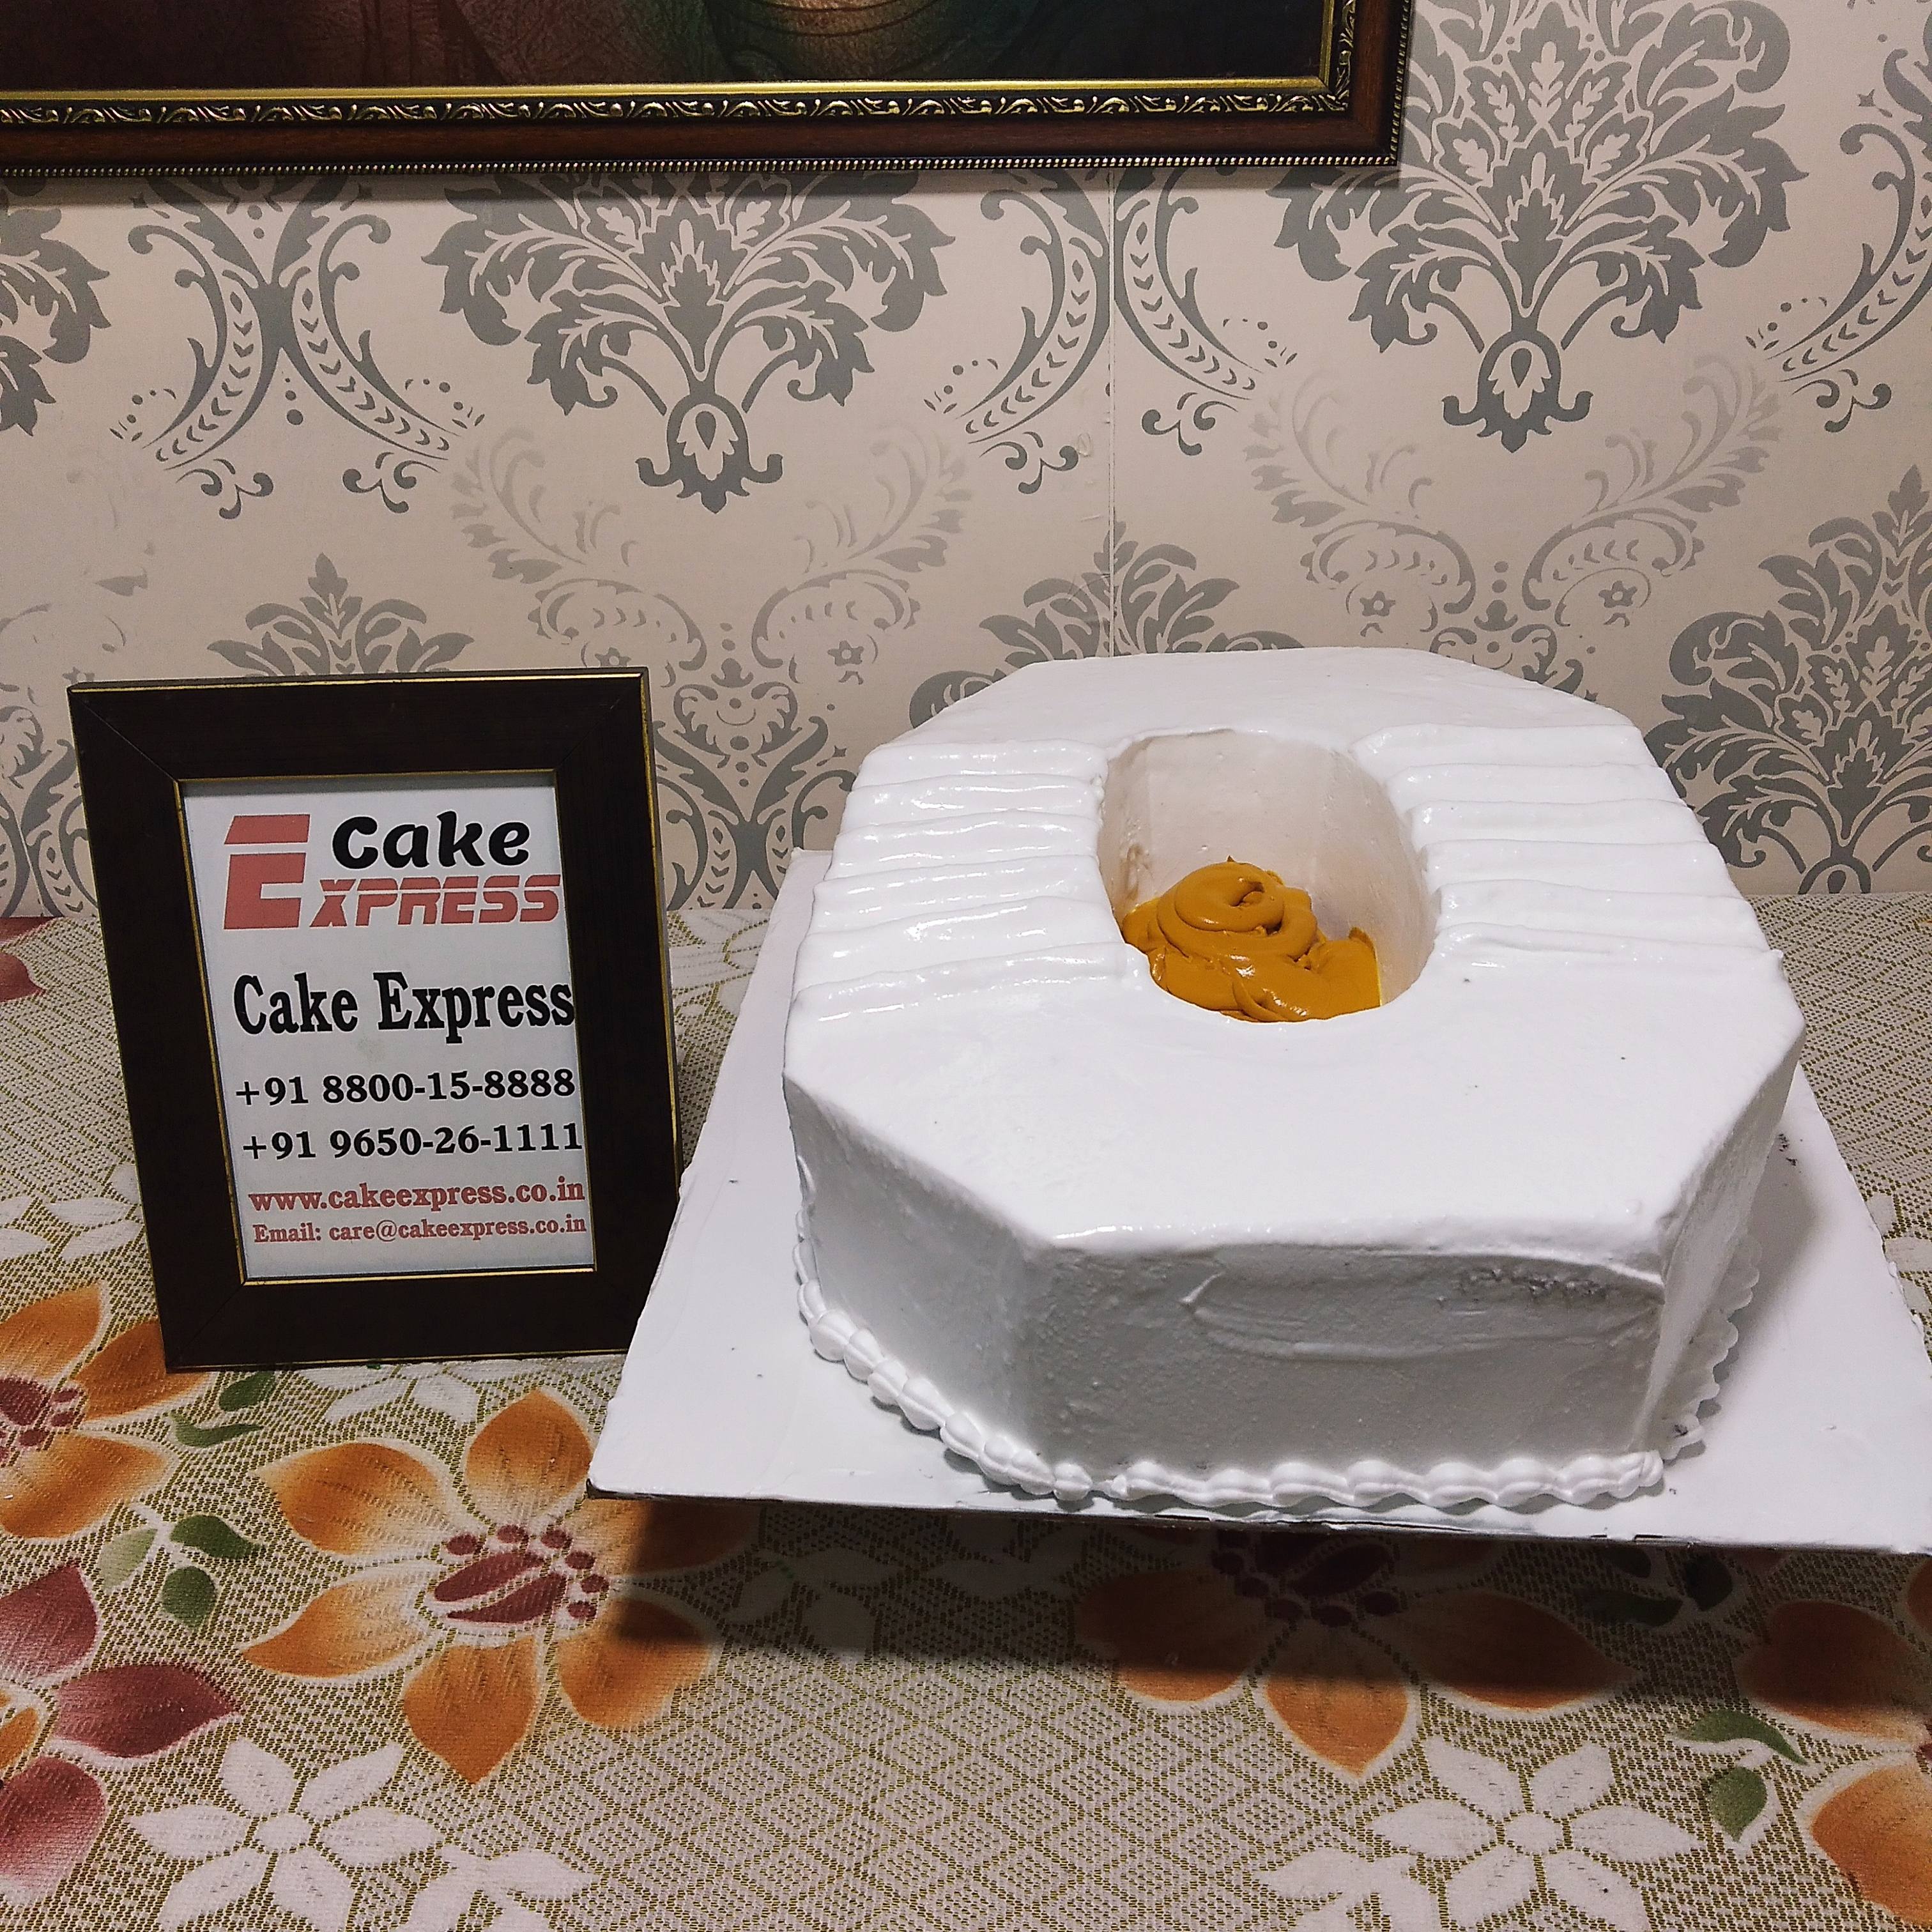 Toilet Sheet Shaped Cake Delivery in Delhi NCR - ₹1, Cake Express